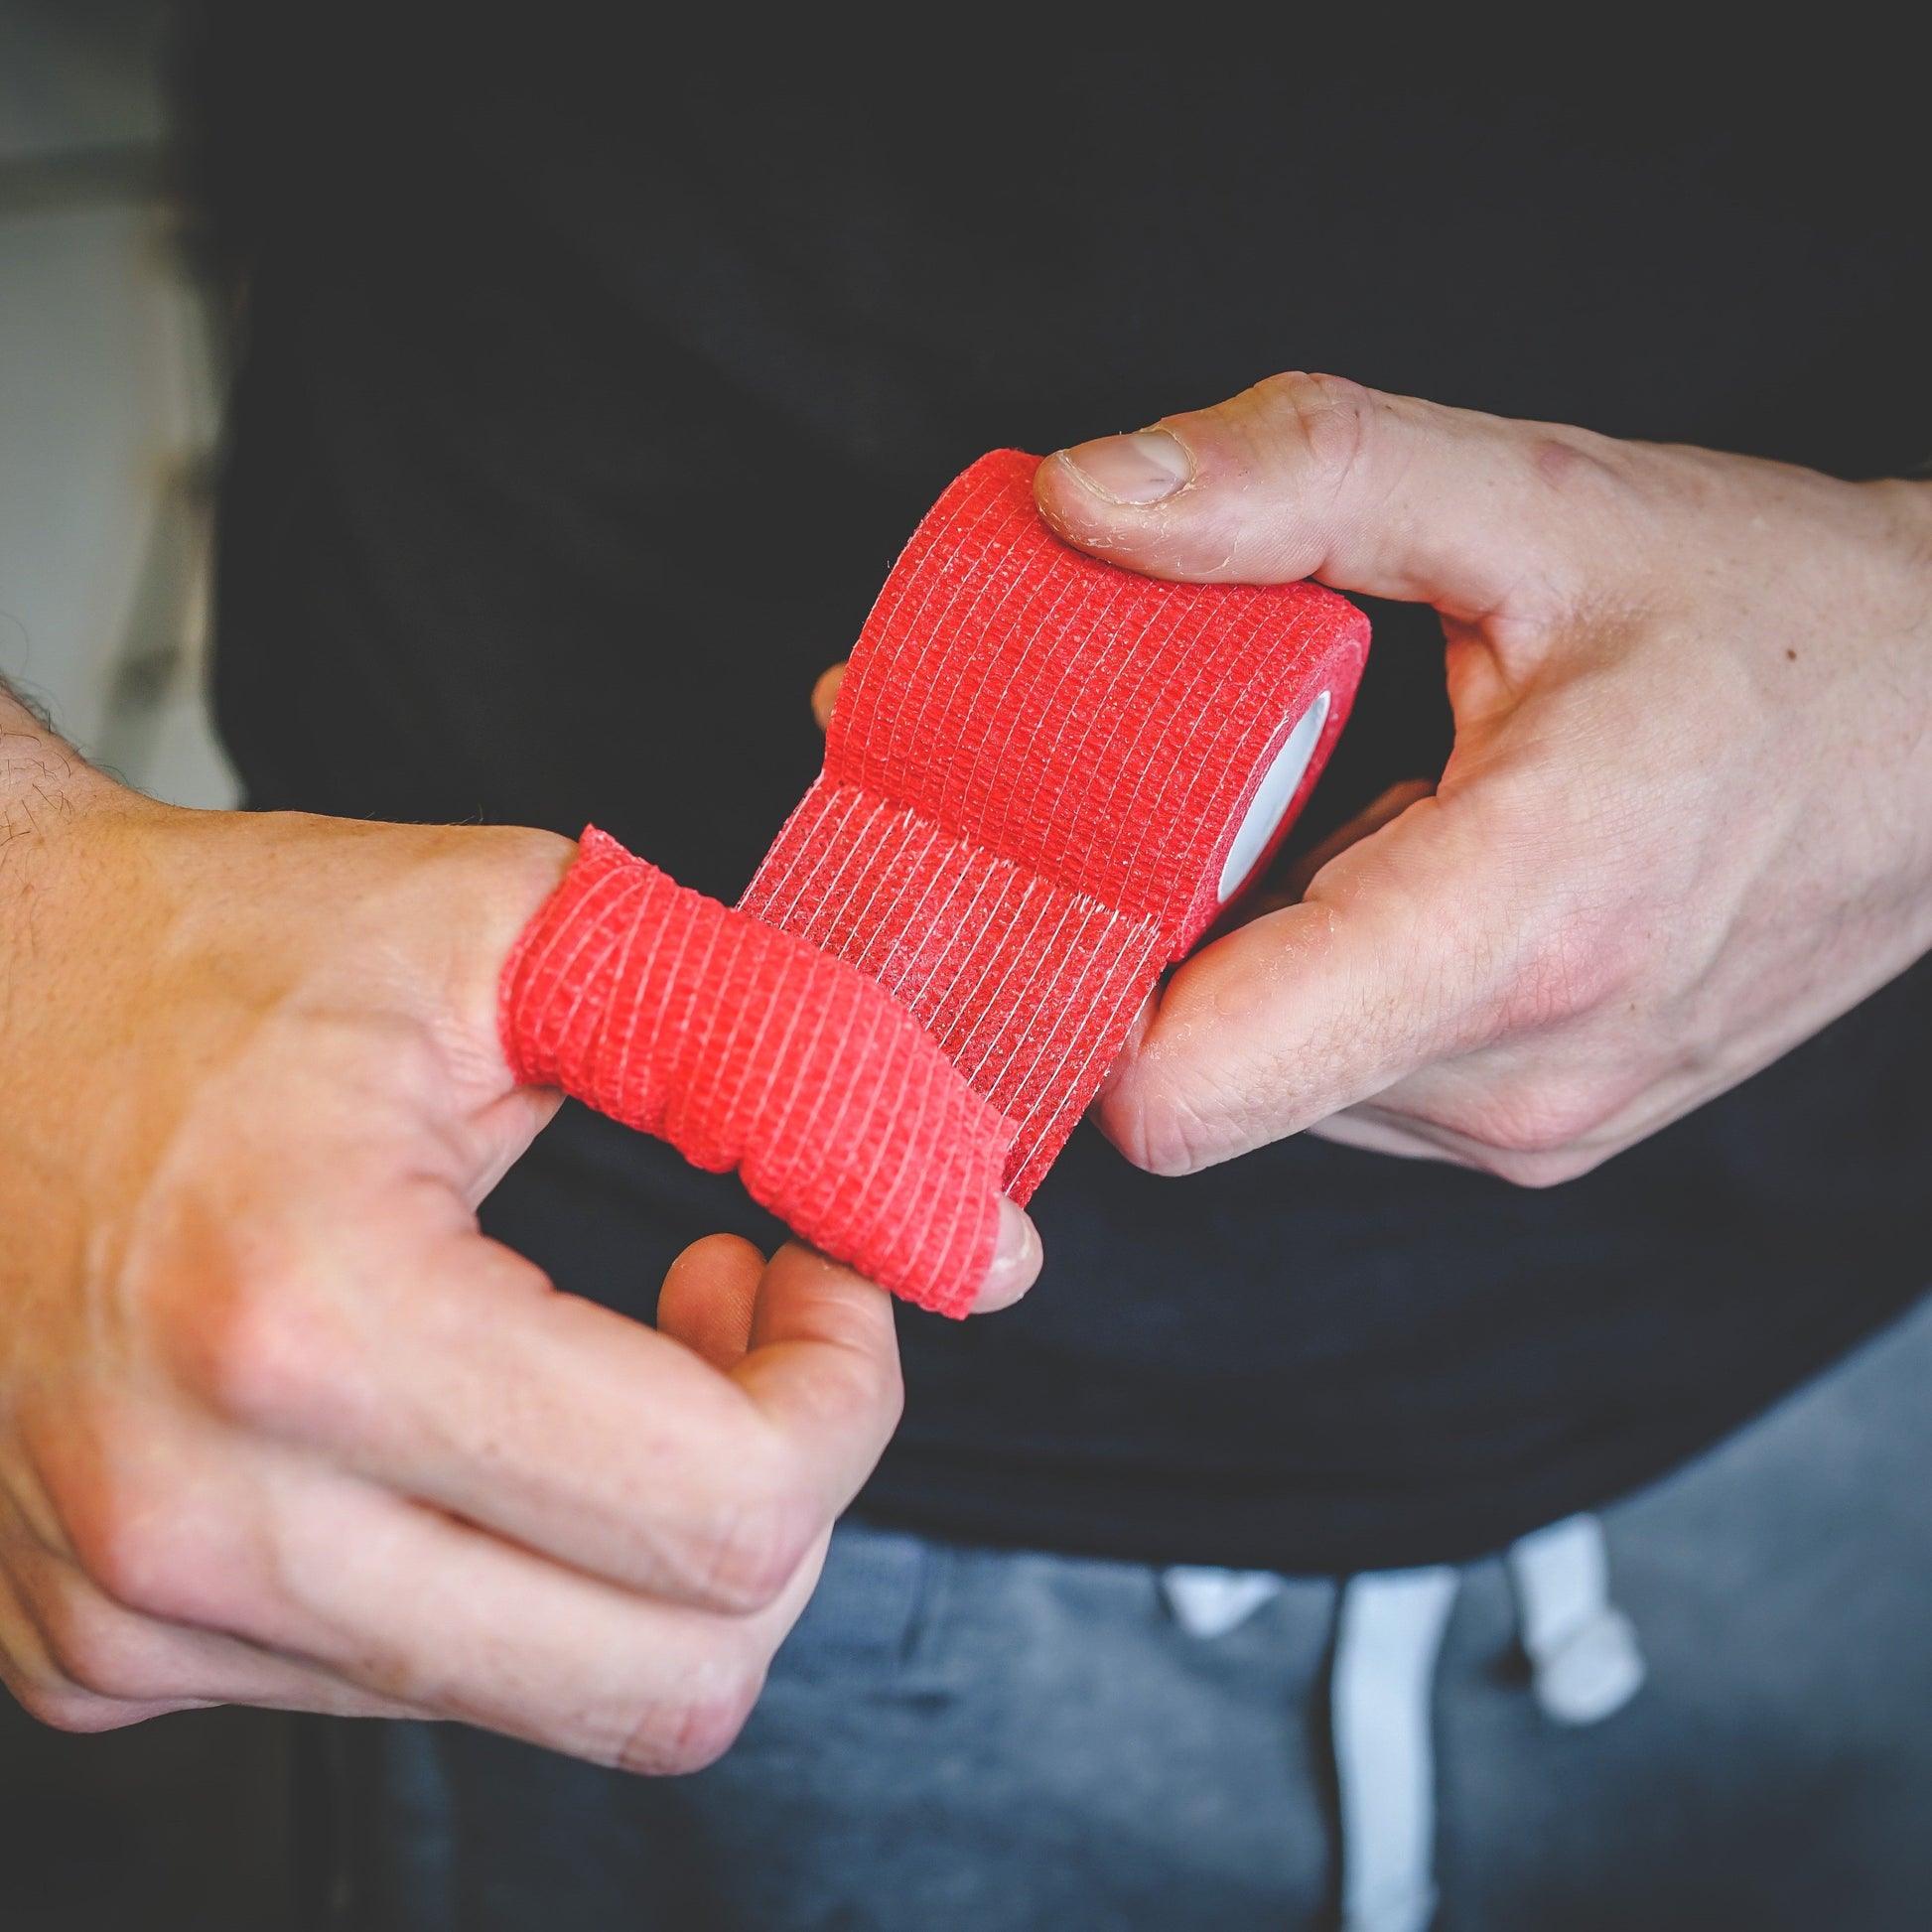 Weightlifting Thumb Tape